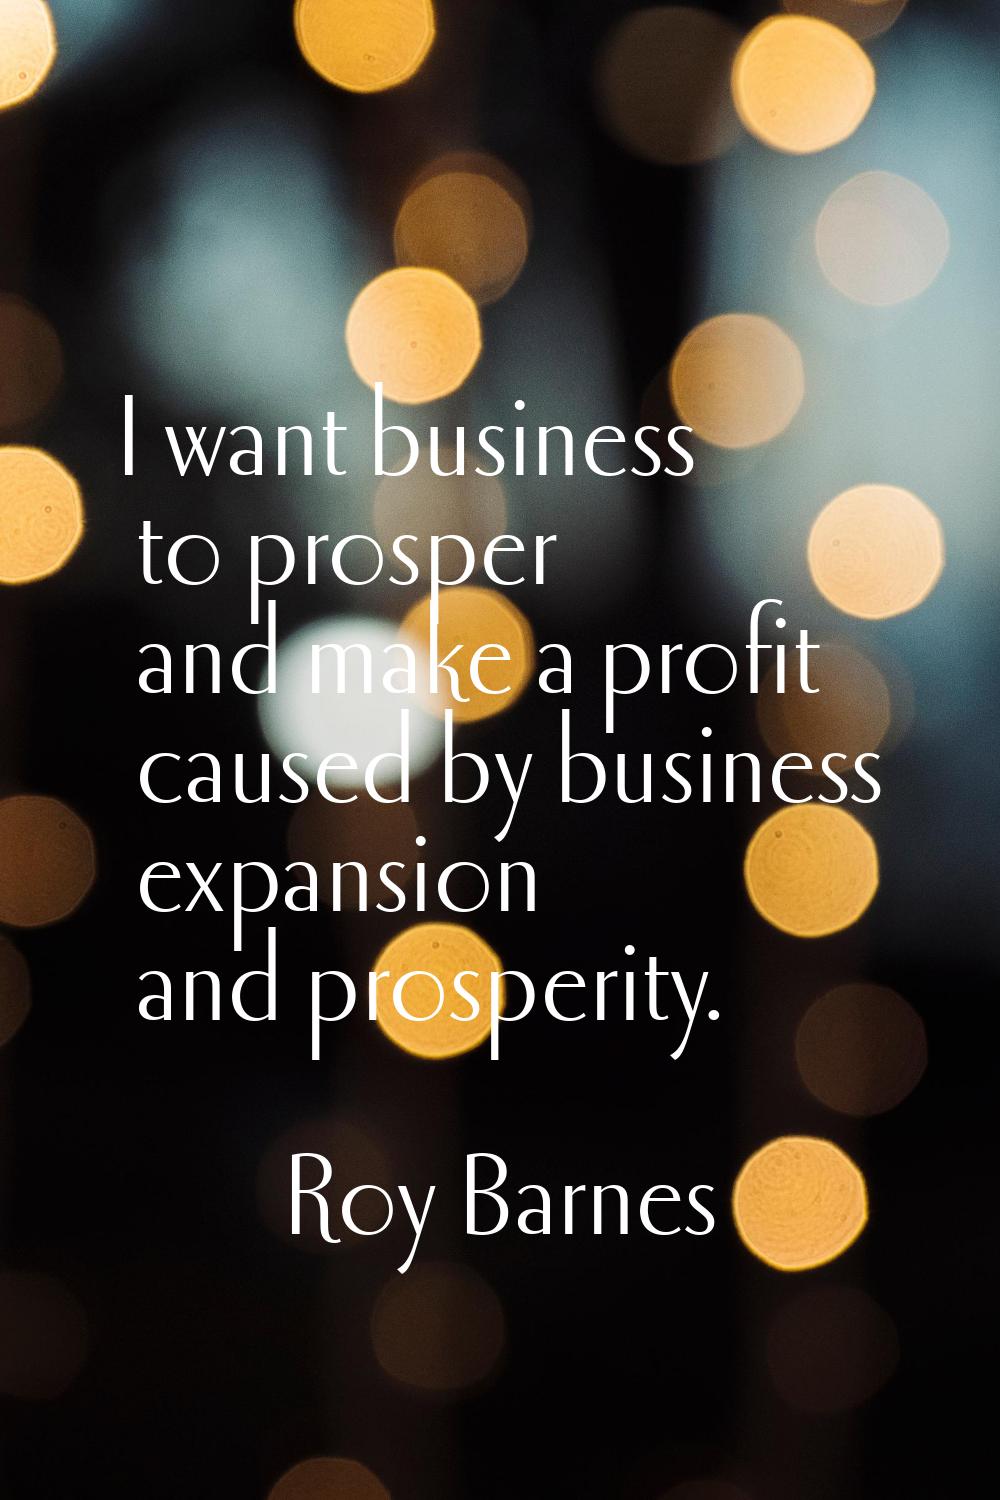 I want business to prosper and make a profit caused by business expansion and prosperity.